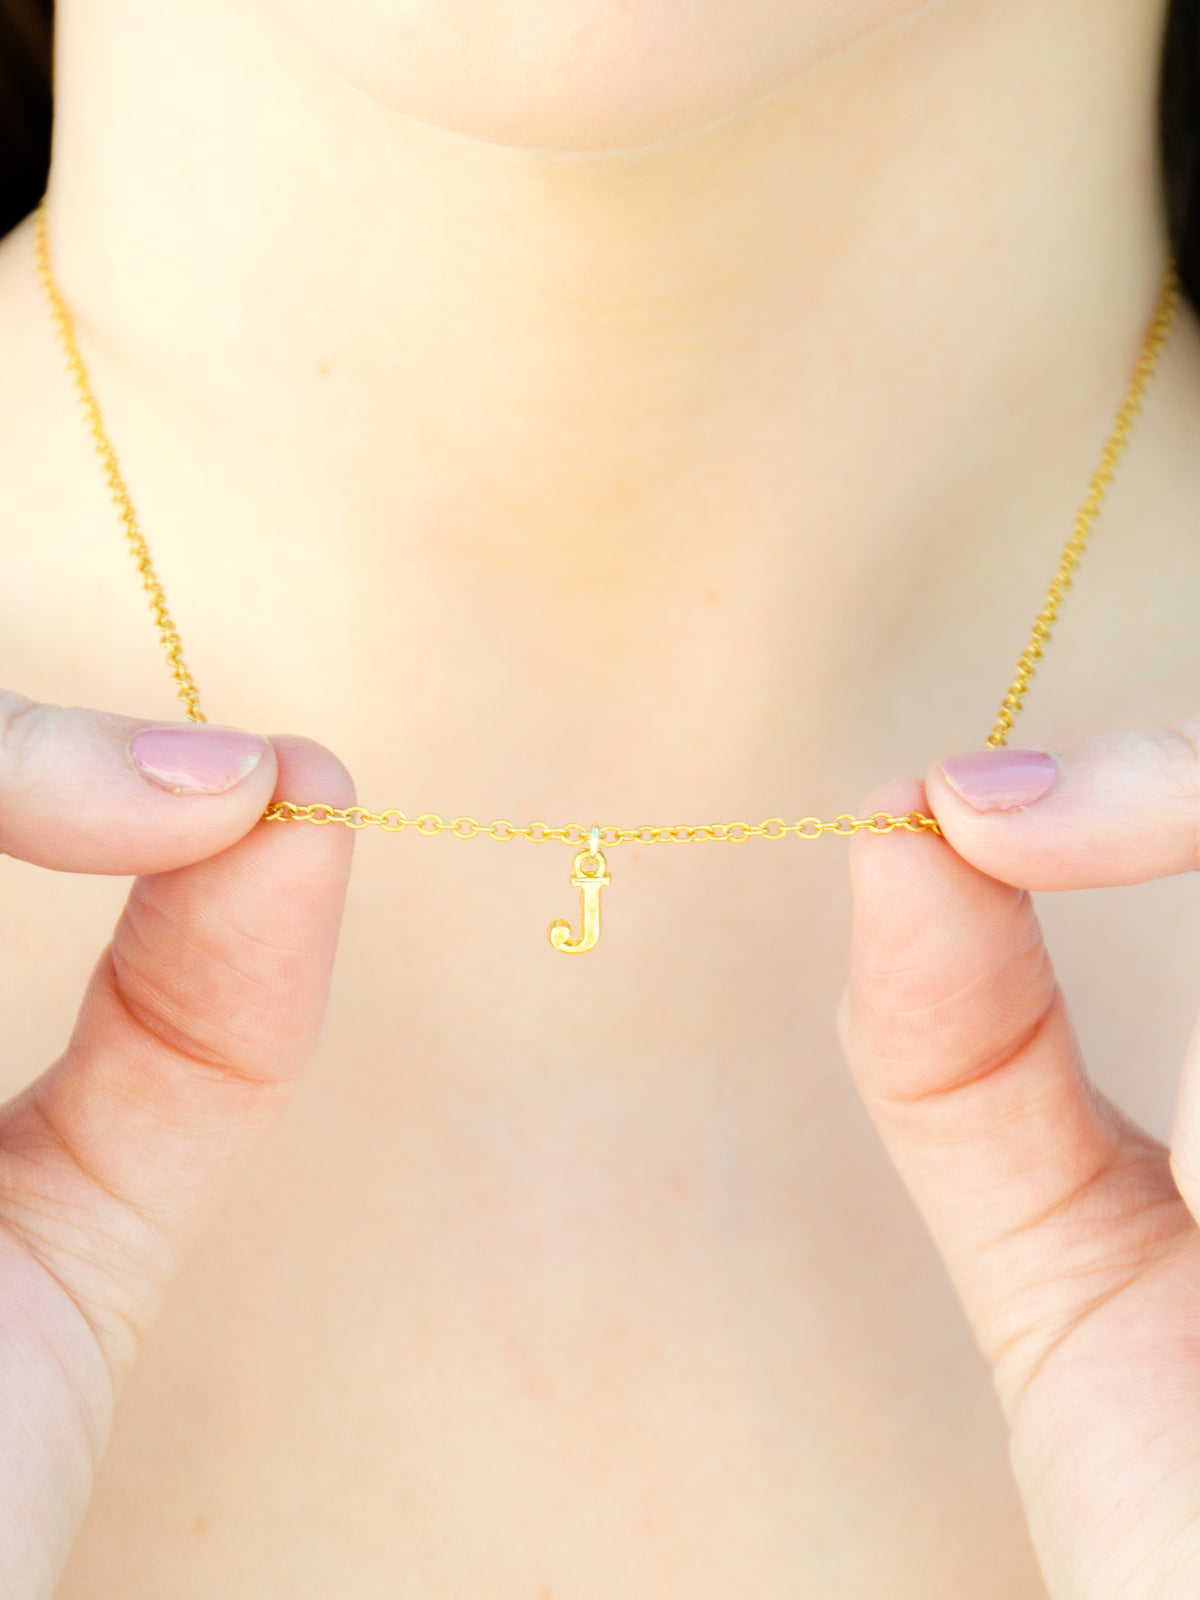 14K Gold Letter Charm Necklace - Initial Jewelry